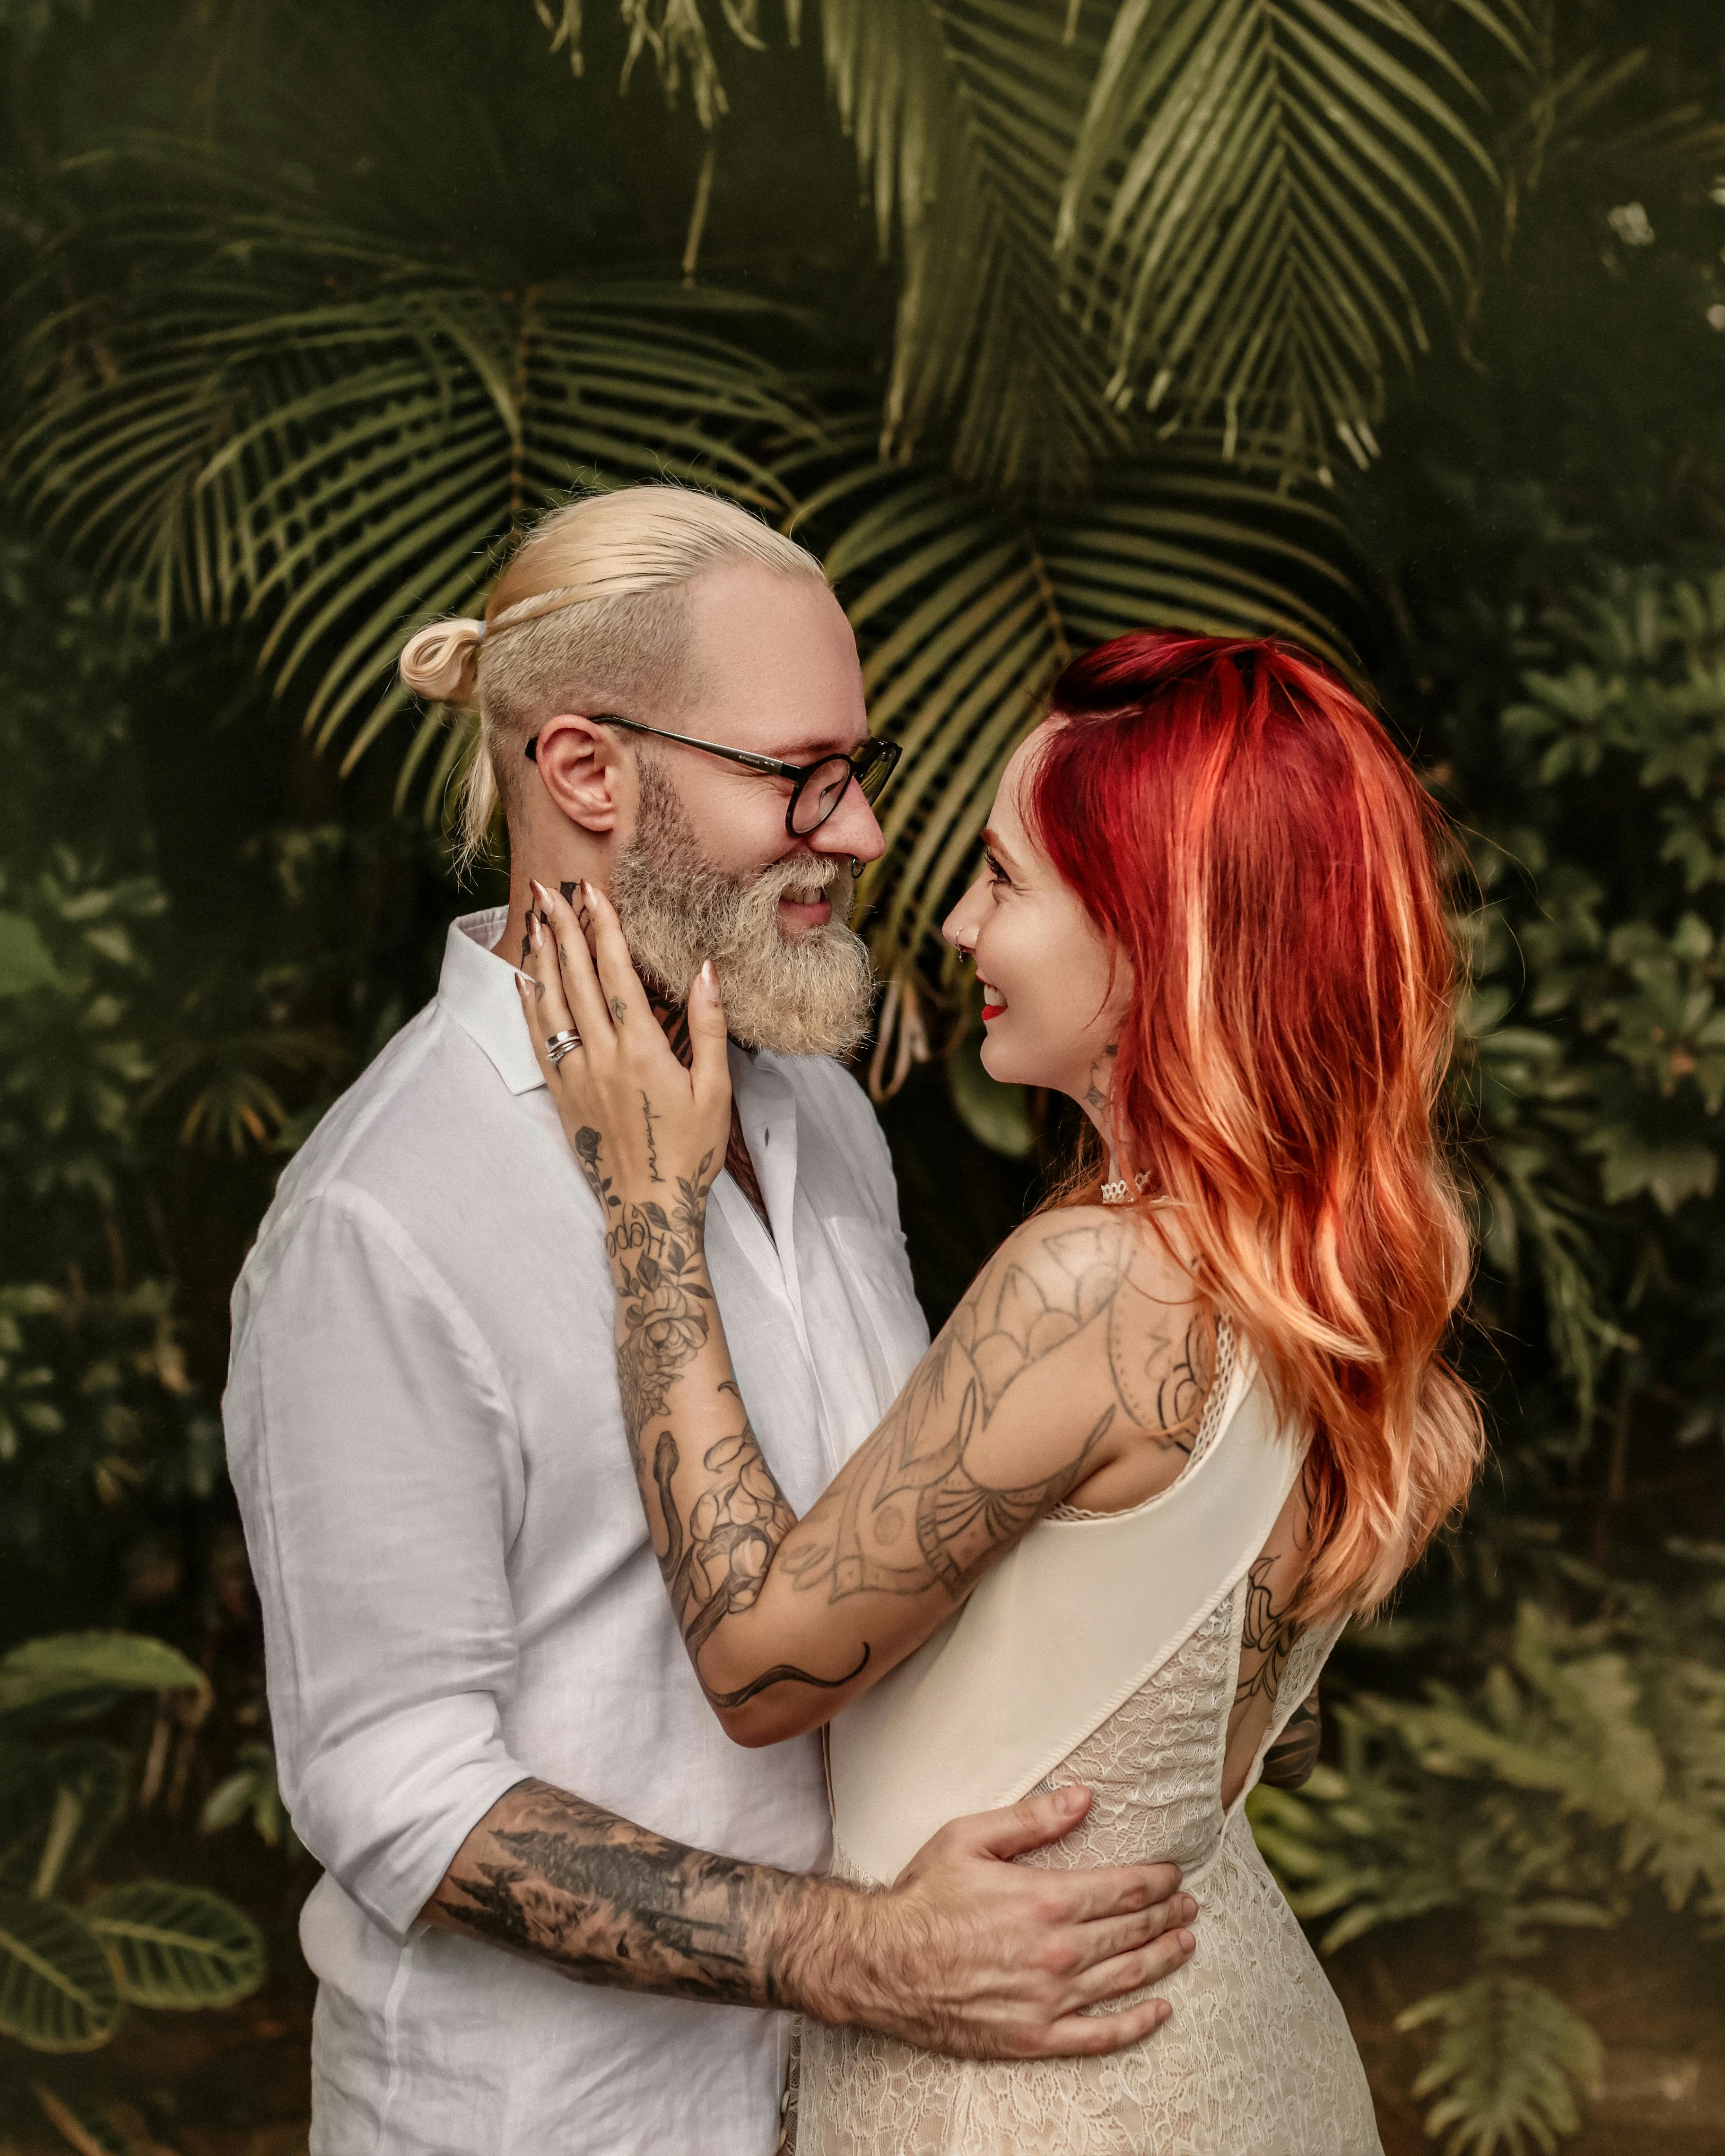 Portrait of Smiling Man with Blonde Hair, Beard and Tattoos · Free Stock  Photo